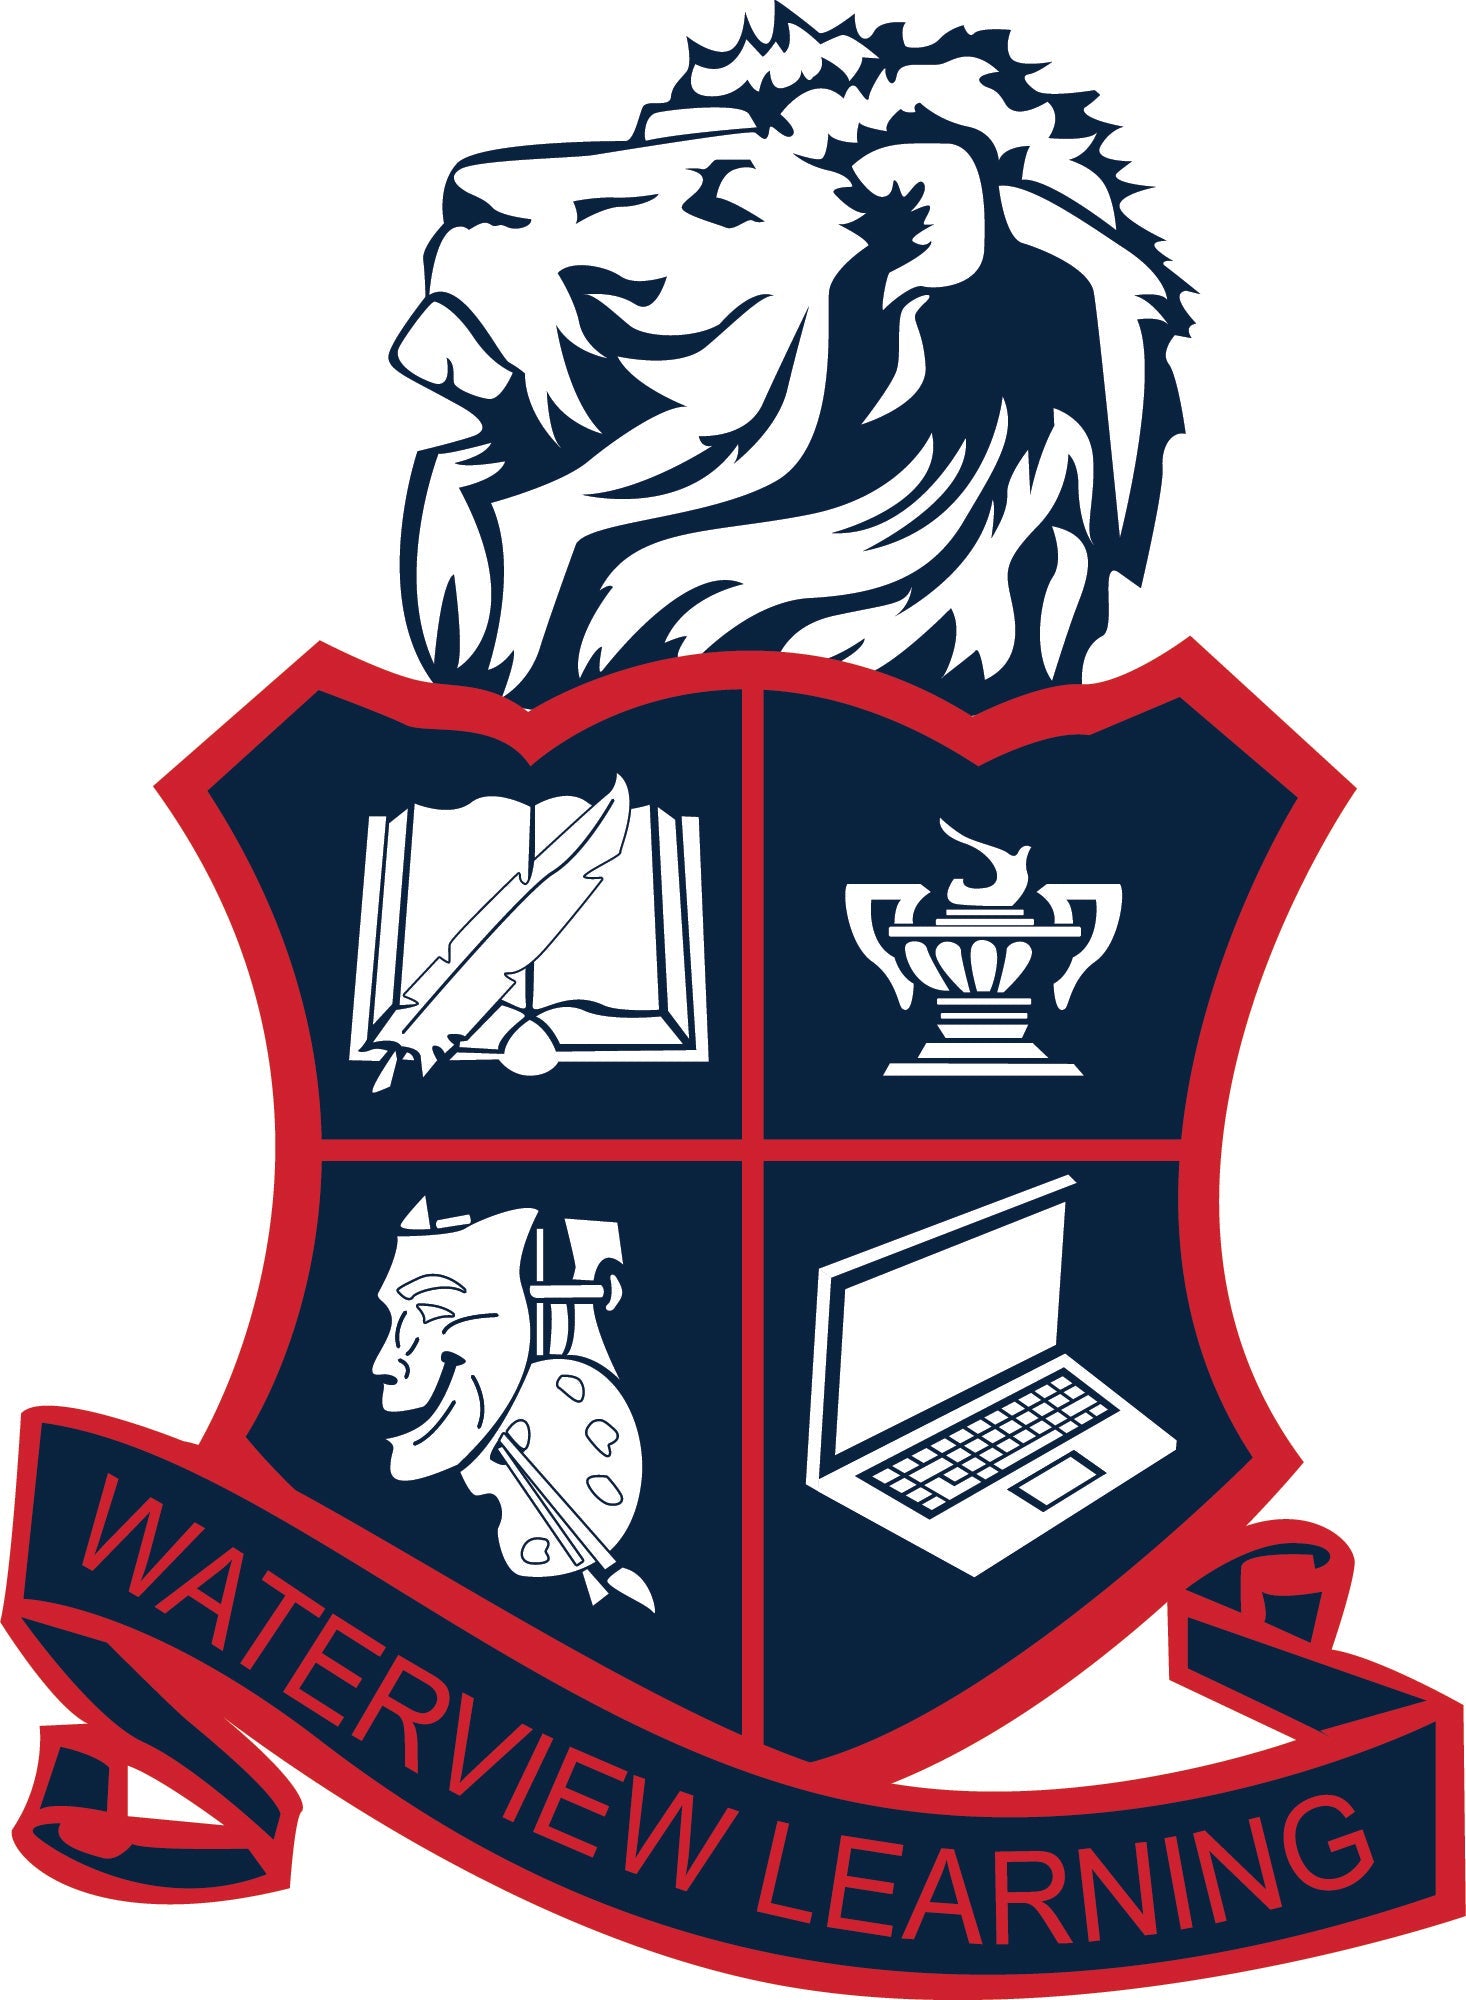 Waterview Learning Academy